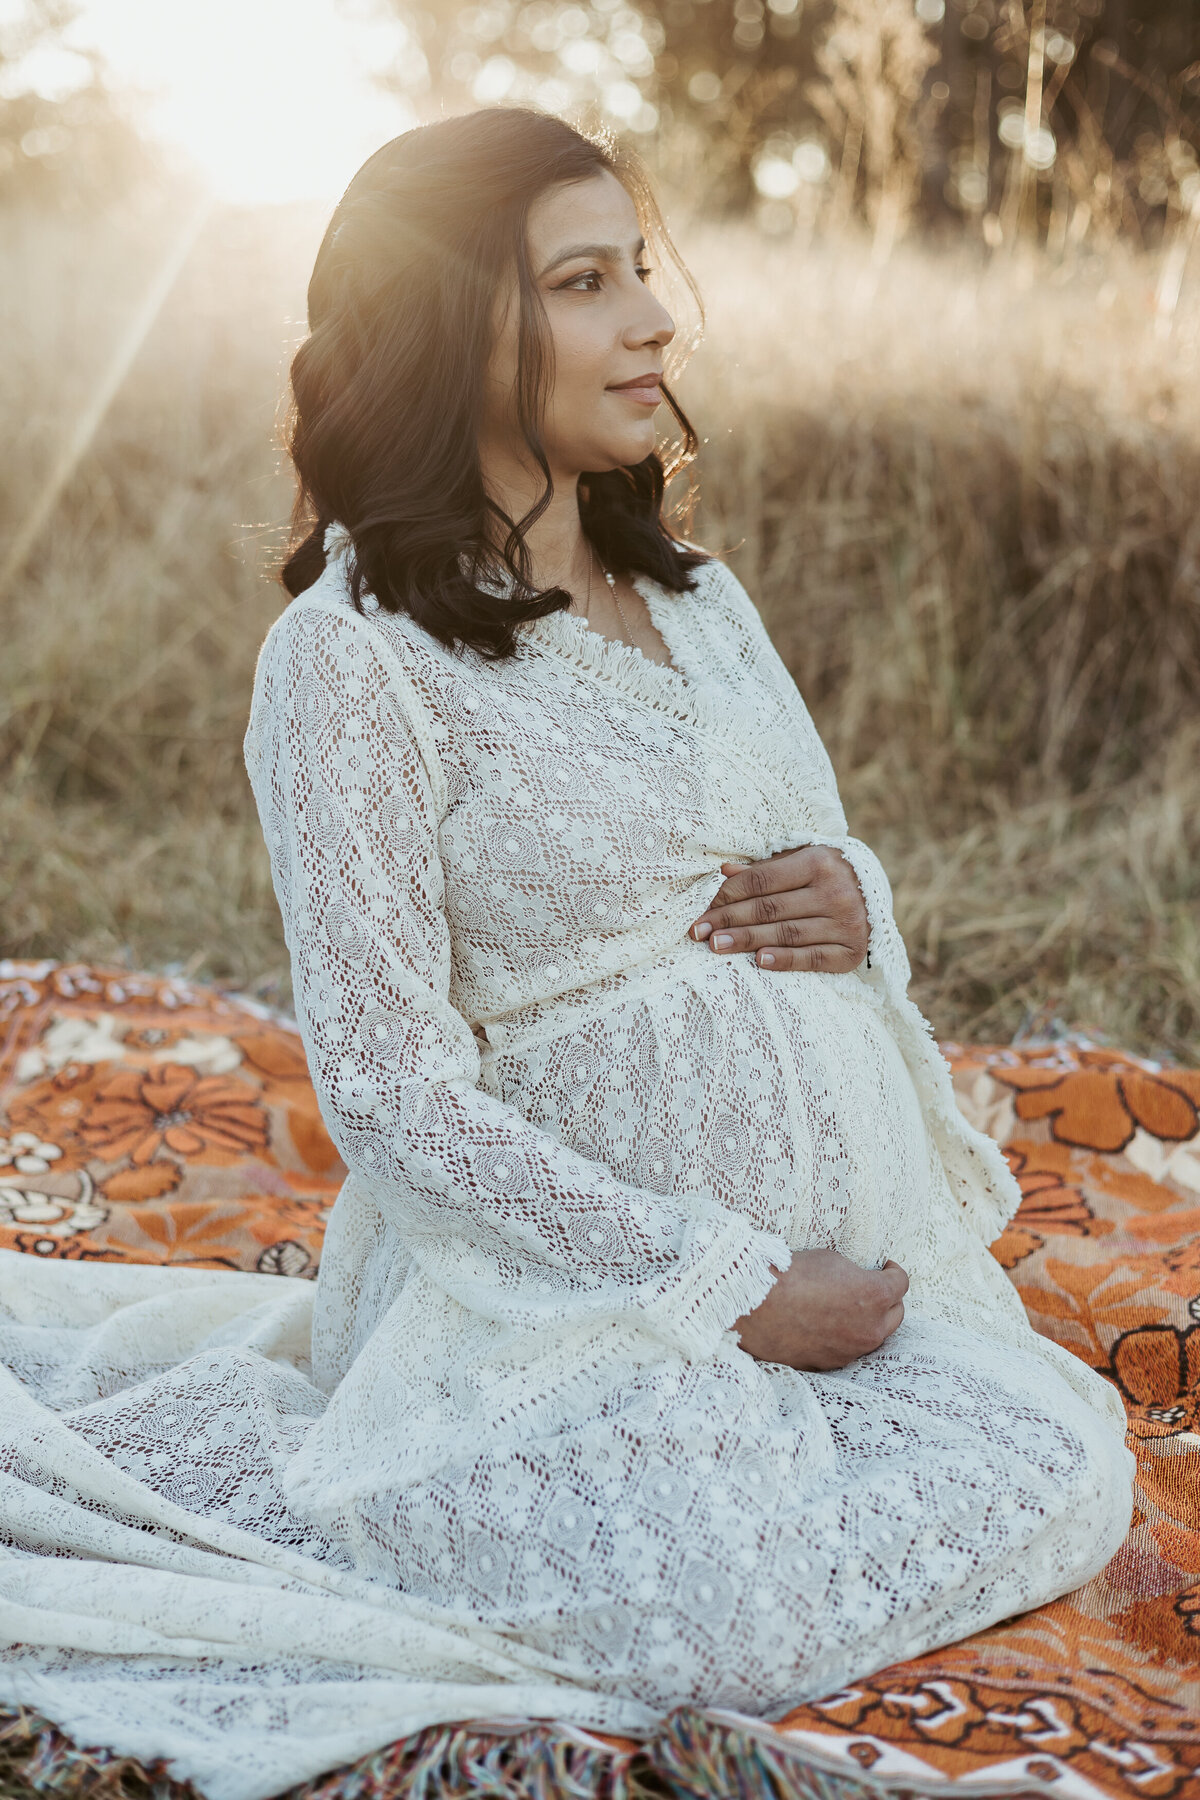 Pregnant woman sitting on her knees on orange picnic blanket while holding her baby bump